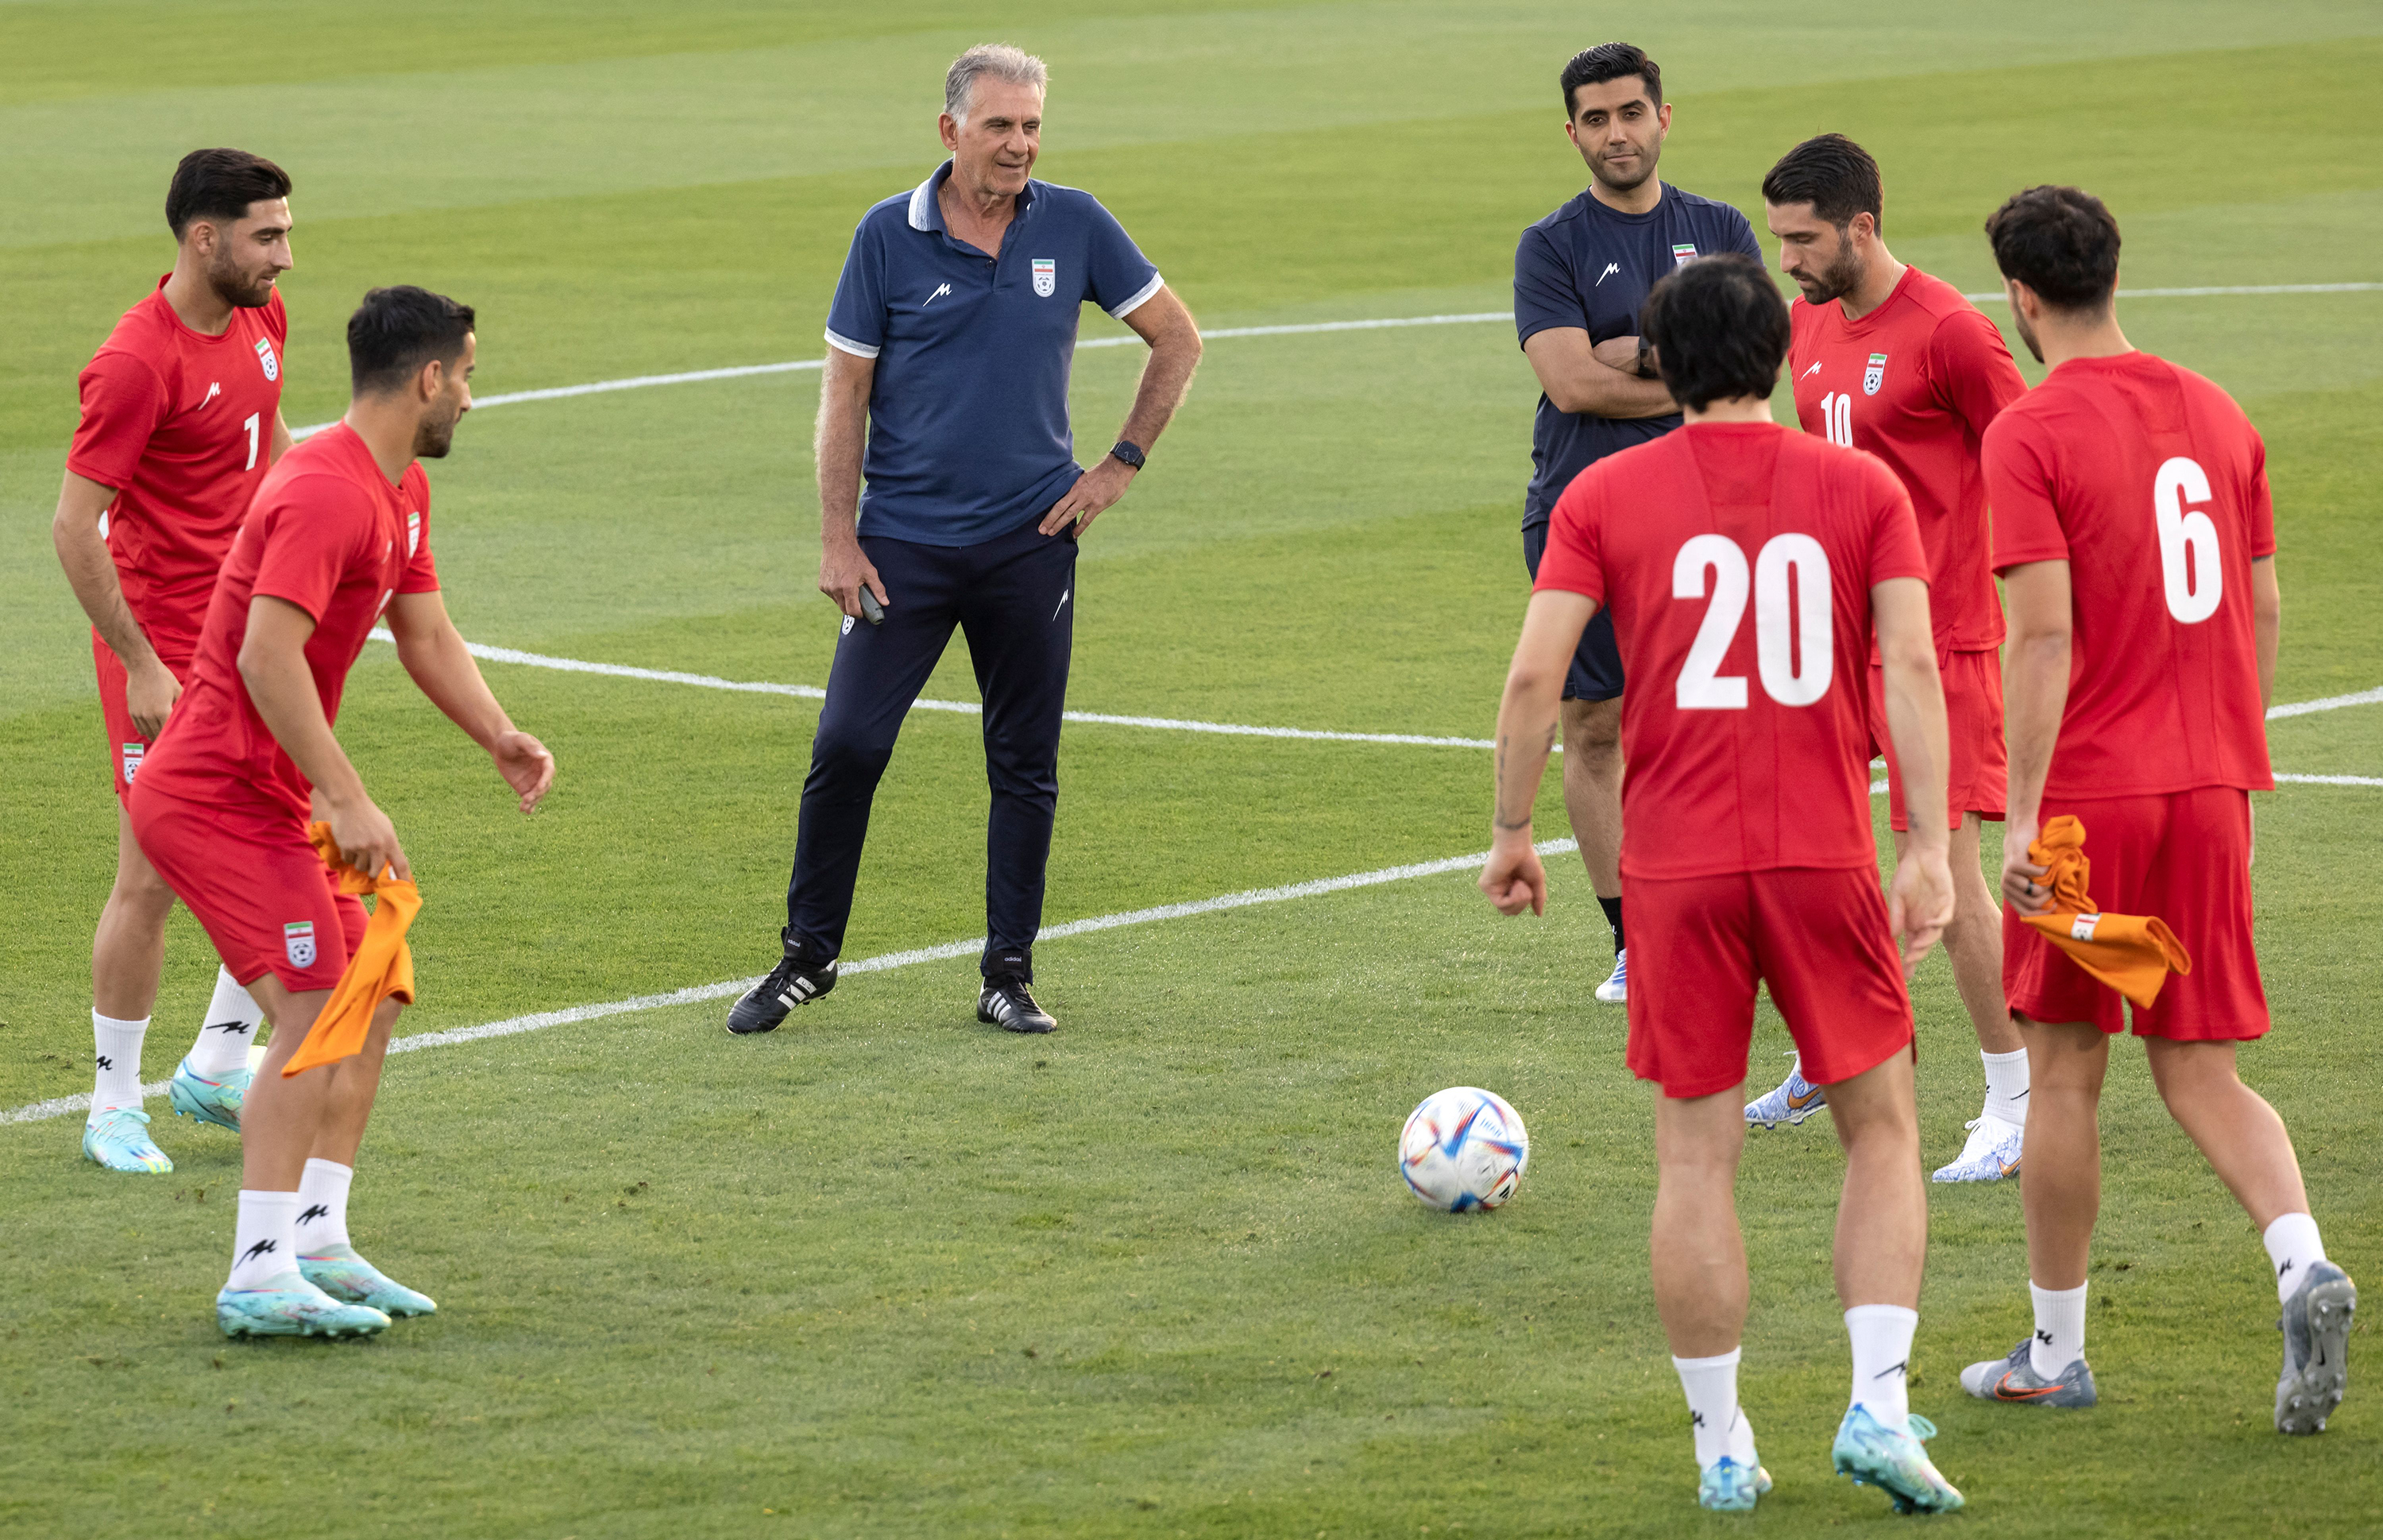 Carlos Queiroz (C) watches team Iran during a training session in Doha on November 17, ahead of the Qatar 2022 World Cup football tournament.